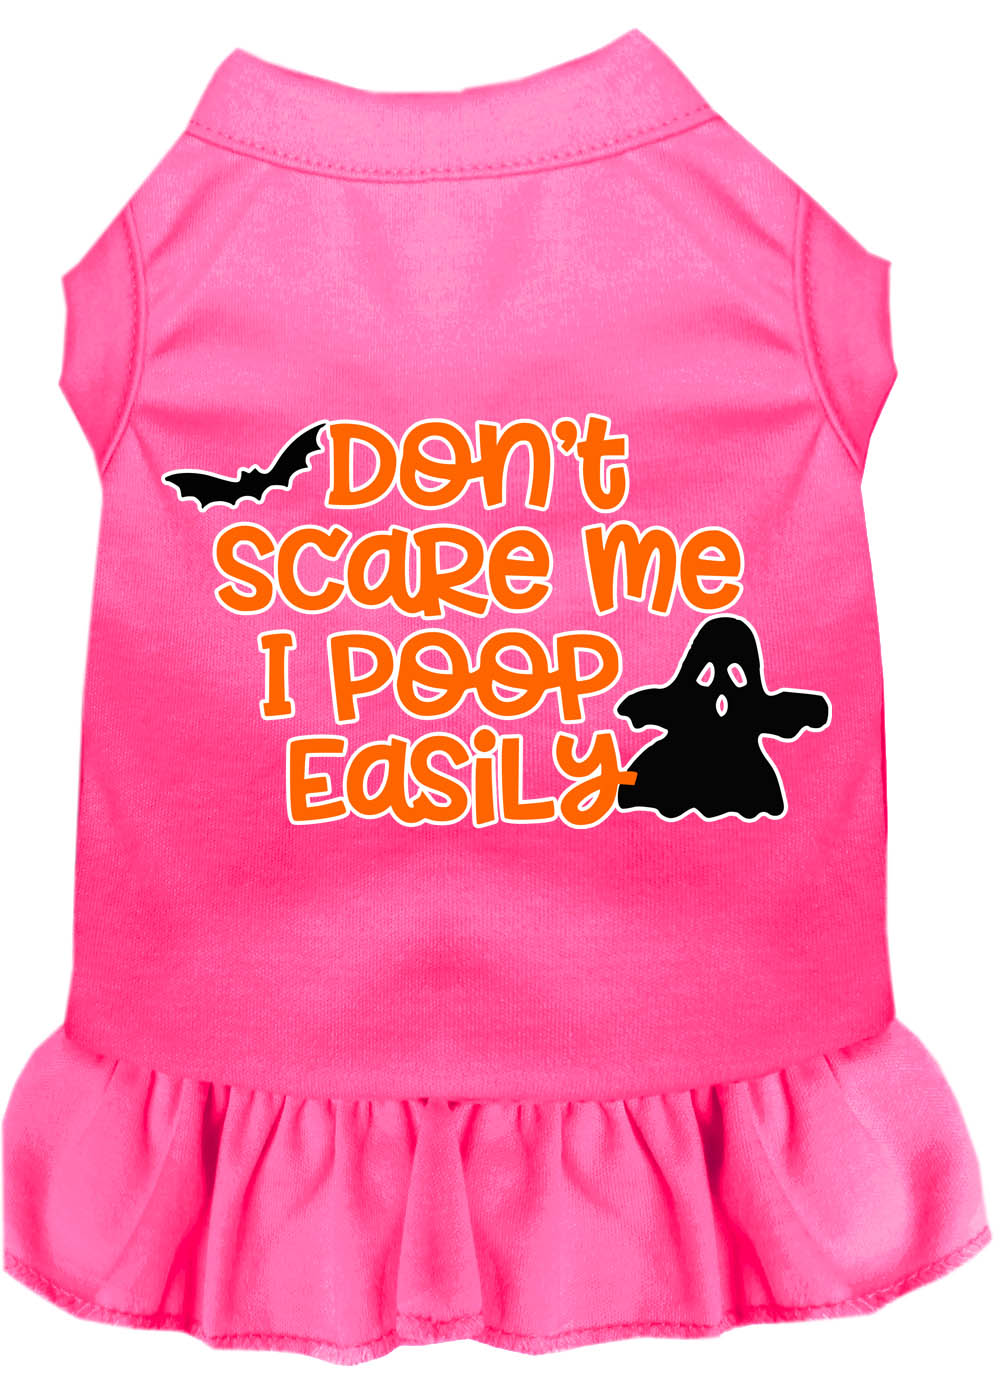 Don't Scare Me, Poops Easily Screen Print Dog Dress Bright Pink Lg